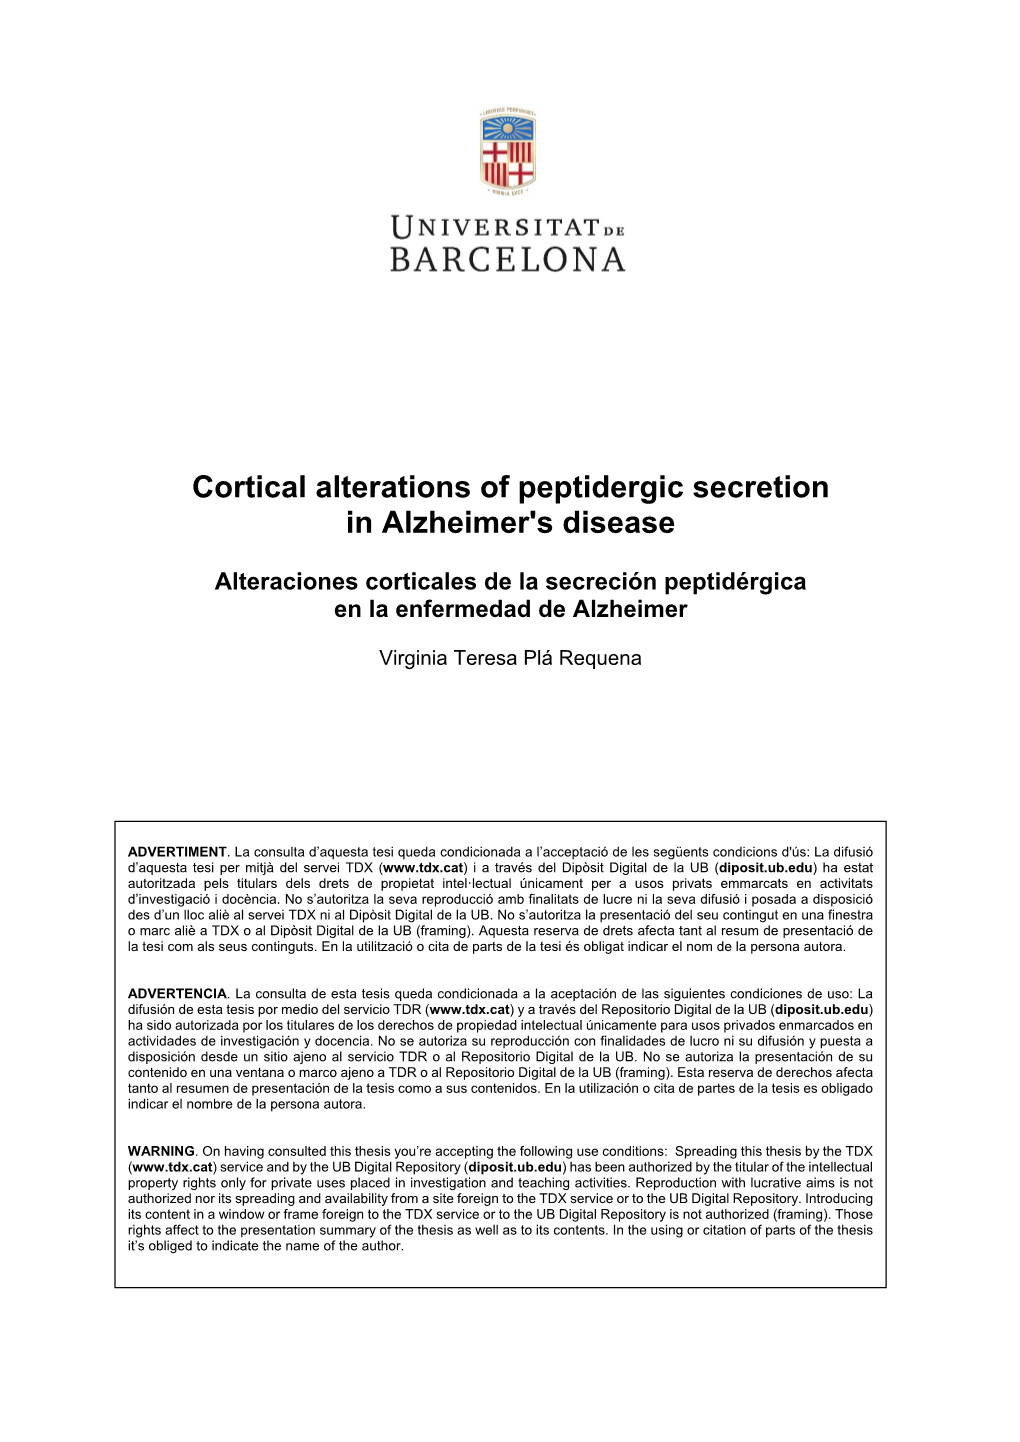 Cortical Alterations of Peptidergic Secretion in Alzheimer's Disease